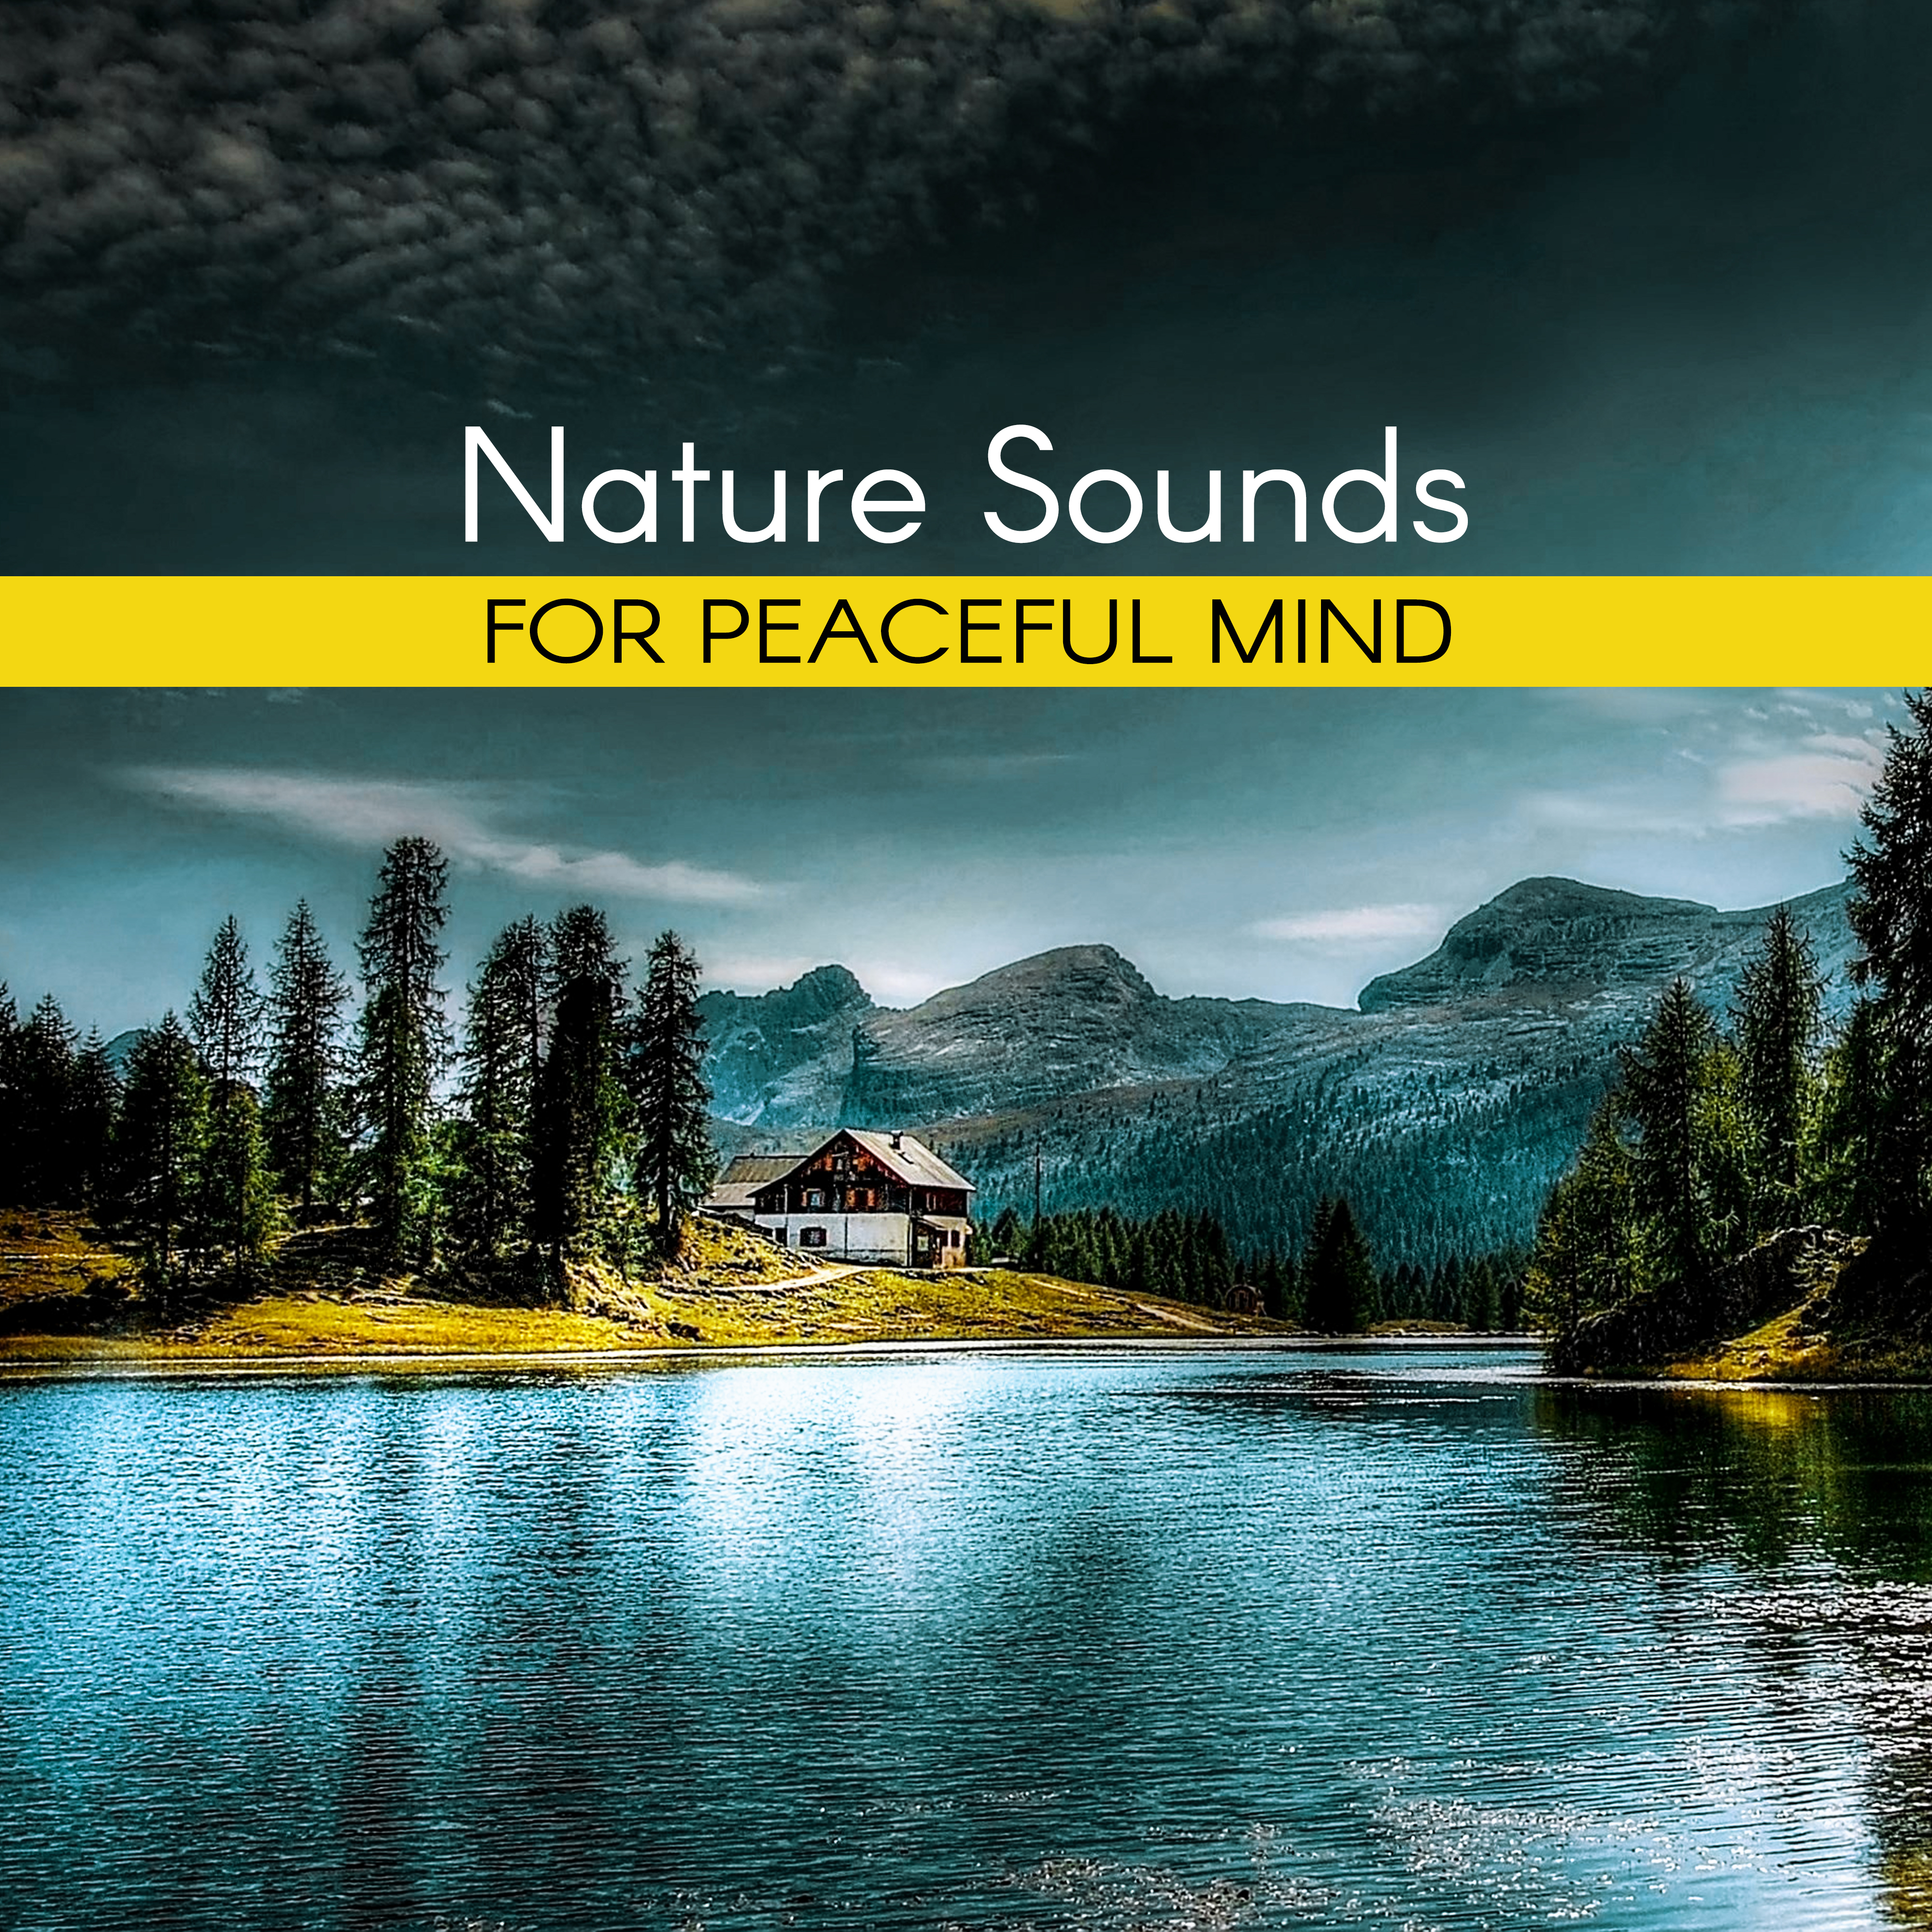 Nature Sounds for Peaceful Mind – Inner Calmness, Harmony Waves, Water Sounds to Relax, New Age Music